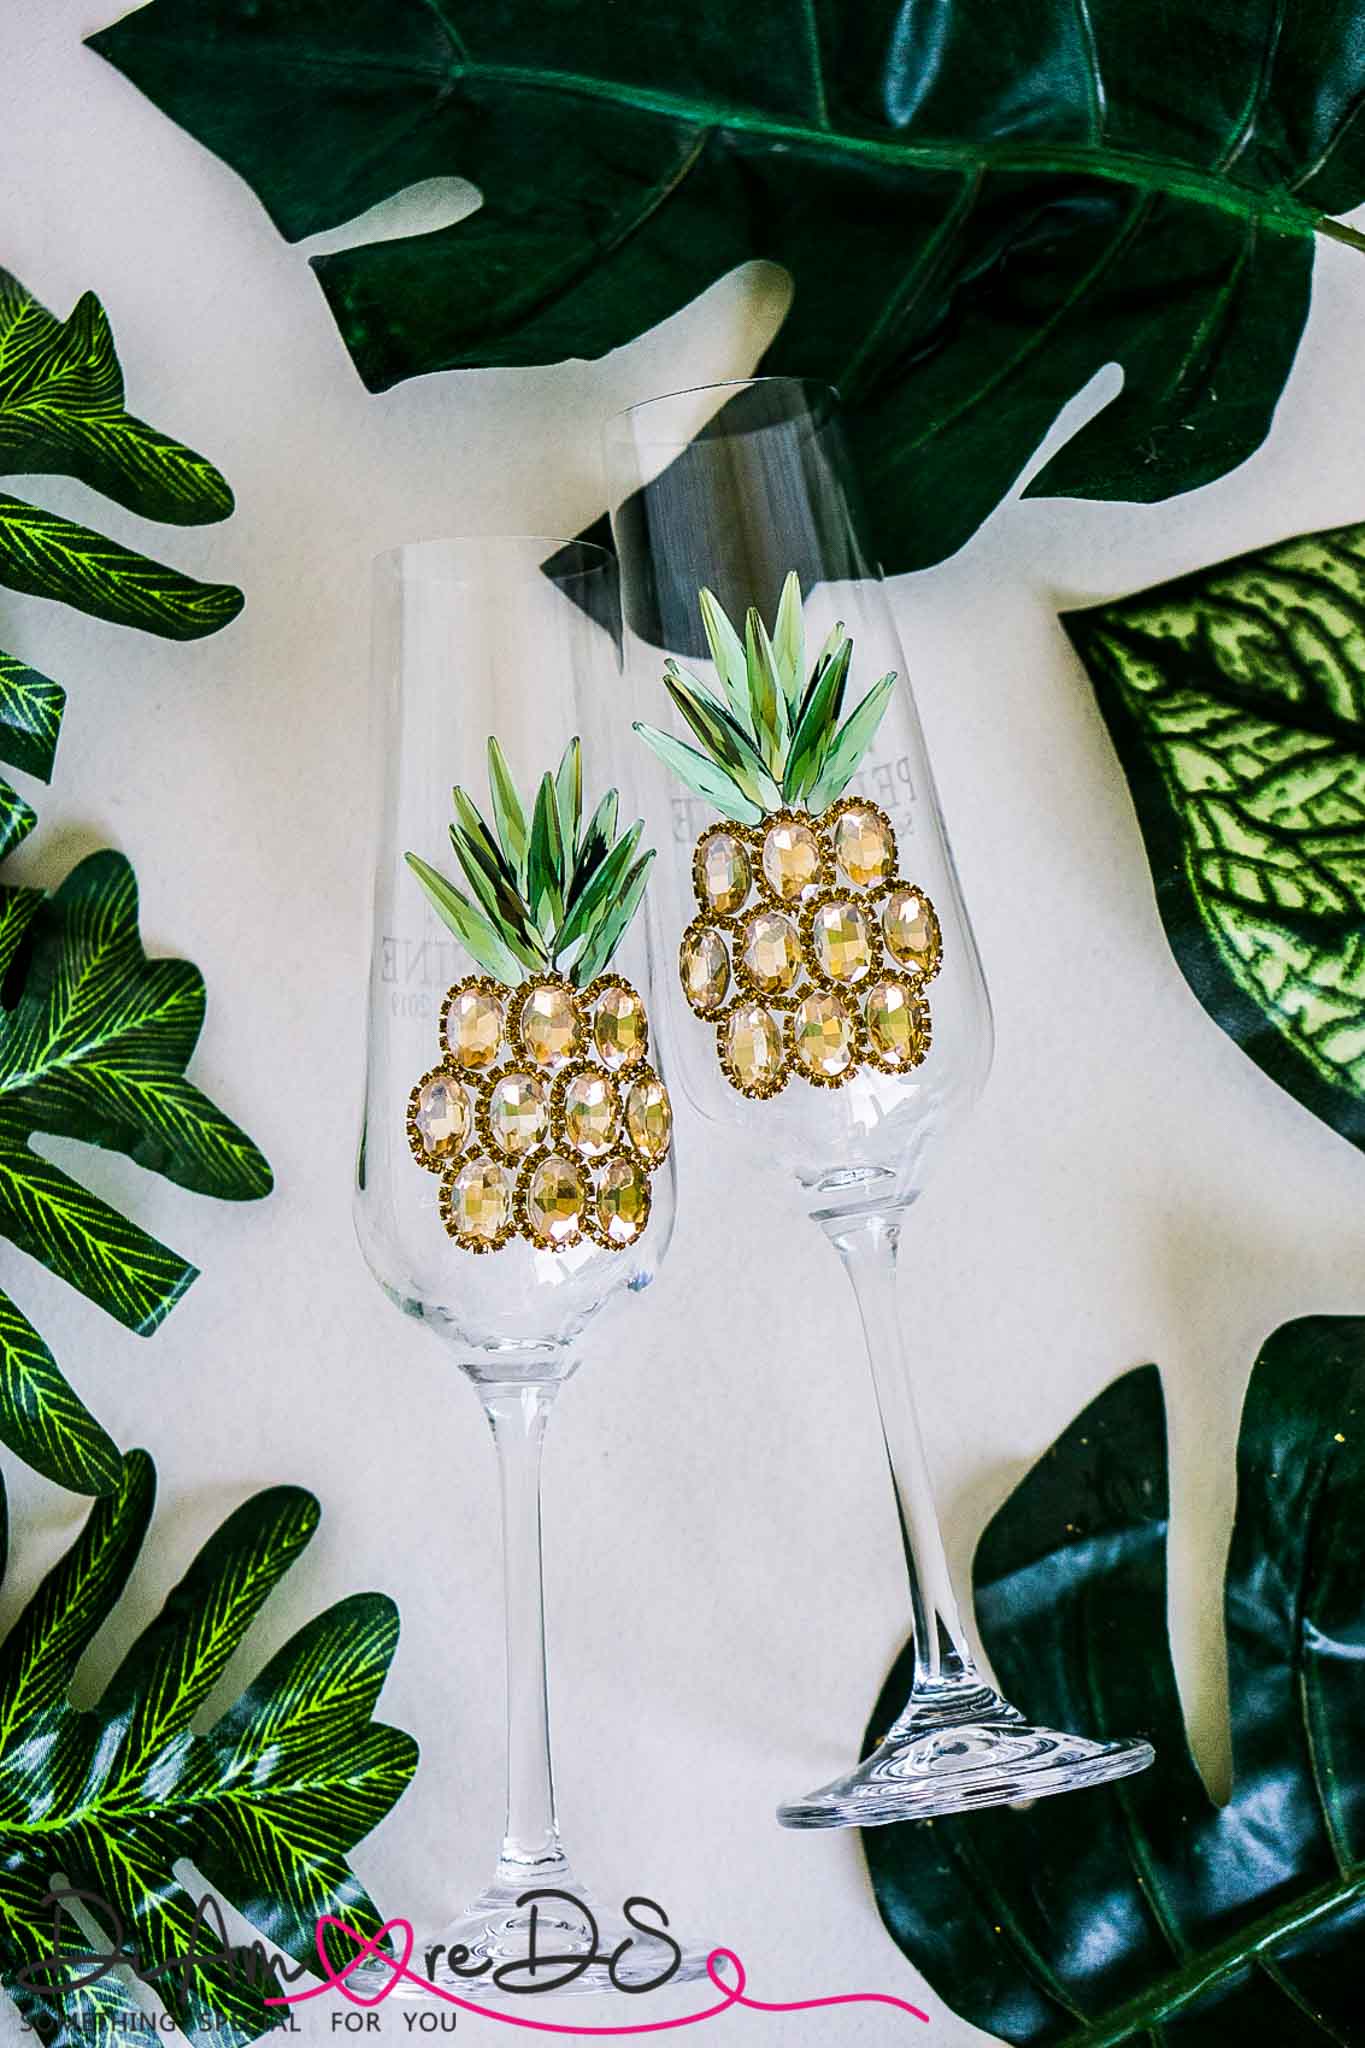 Bespoke champagne flute with a handcrafted pineapple design, a sophisticated addition to tropical decor."